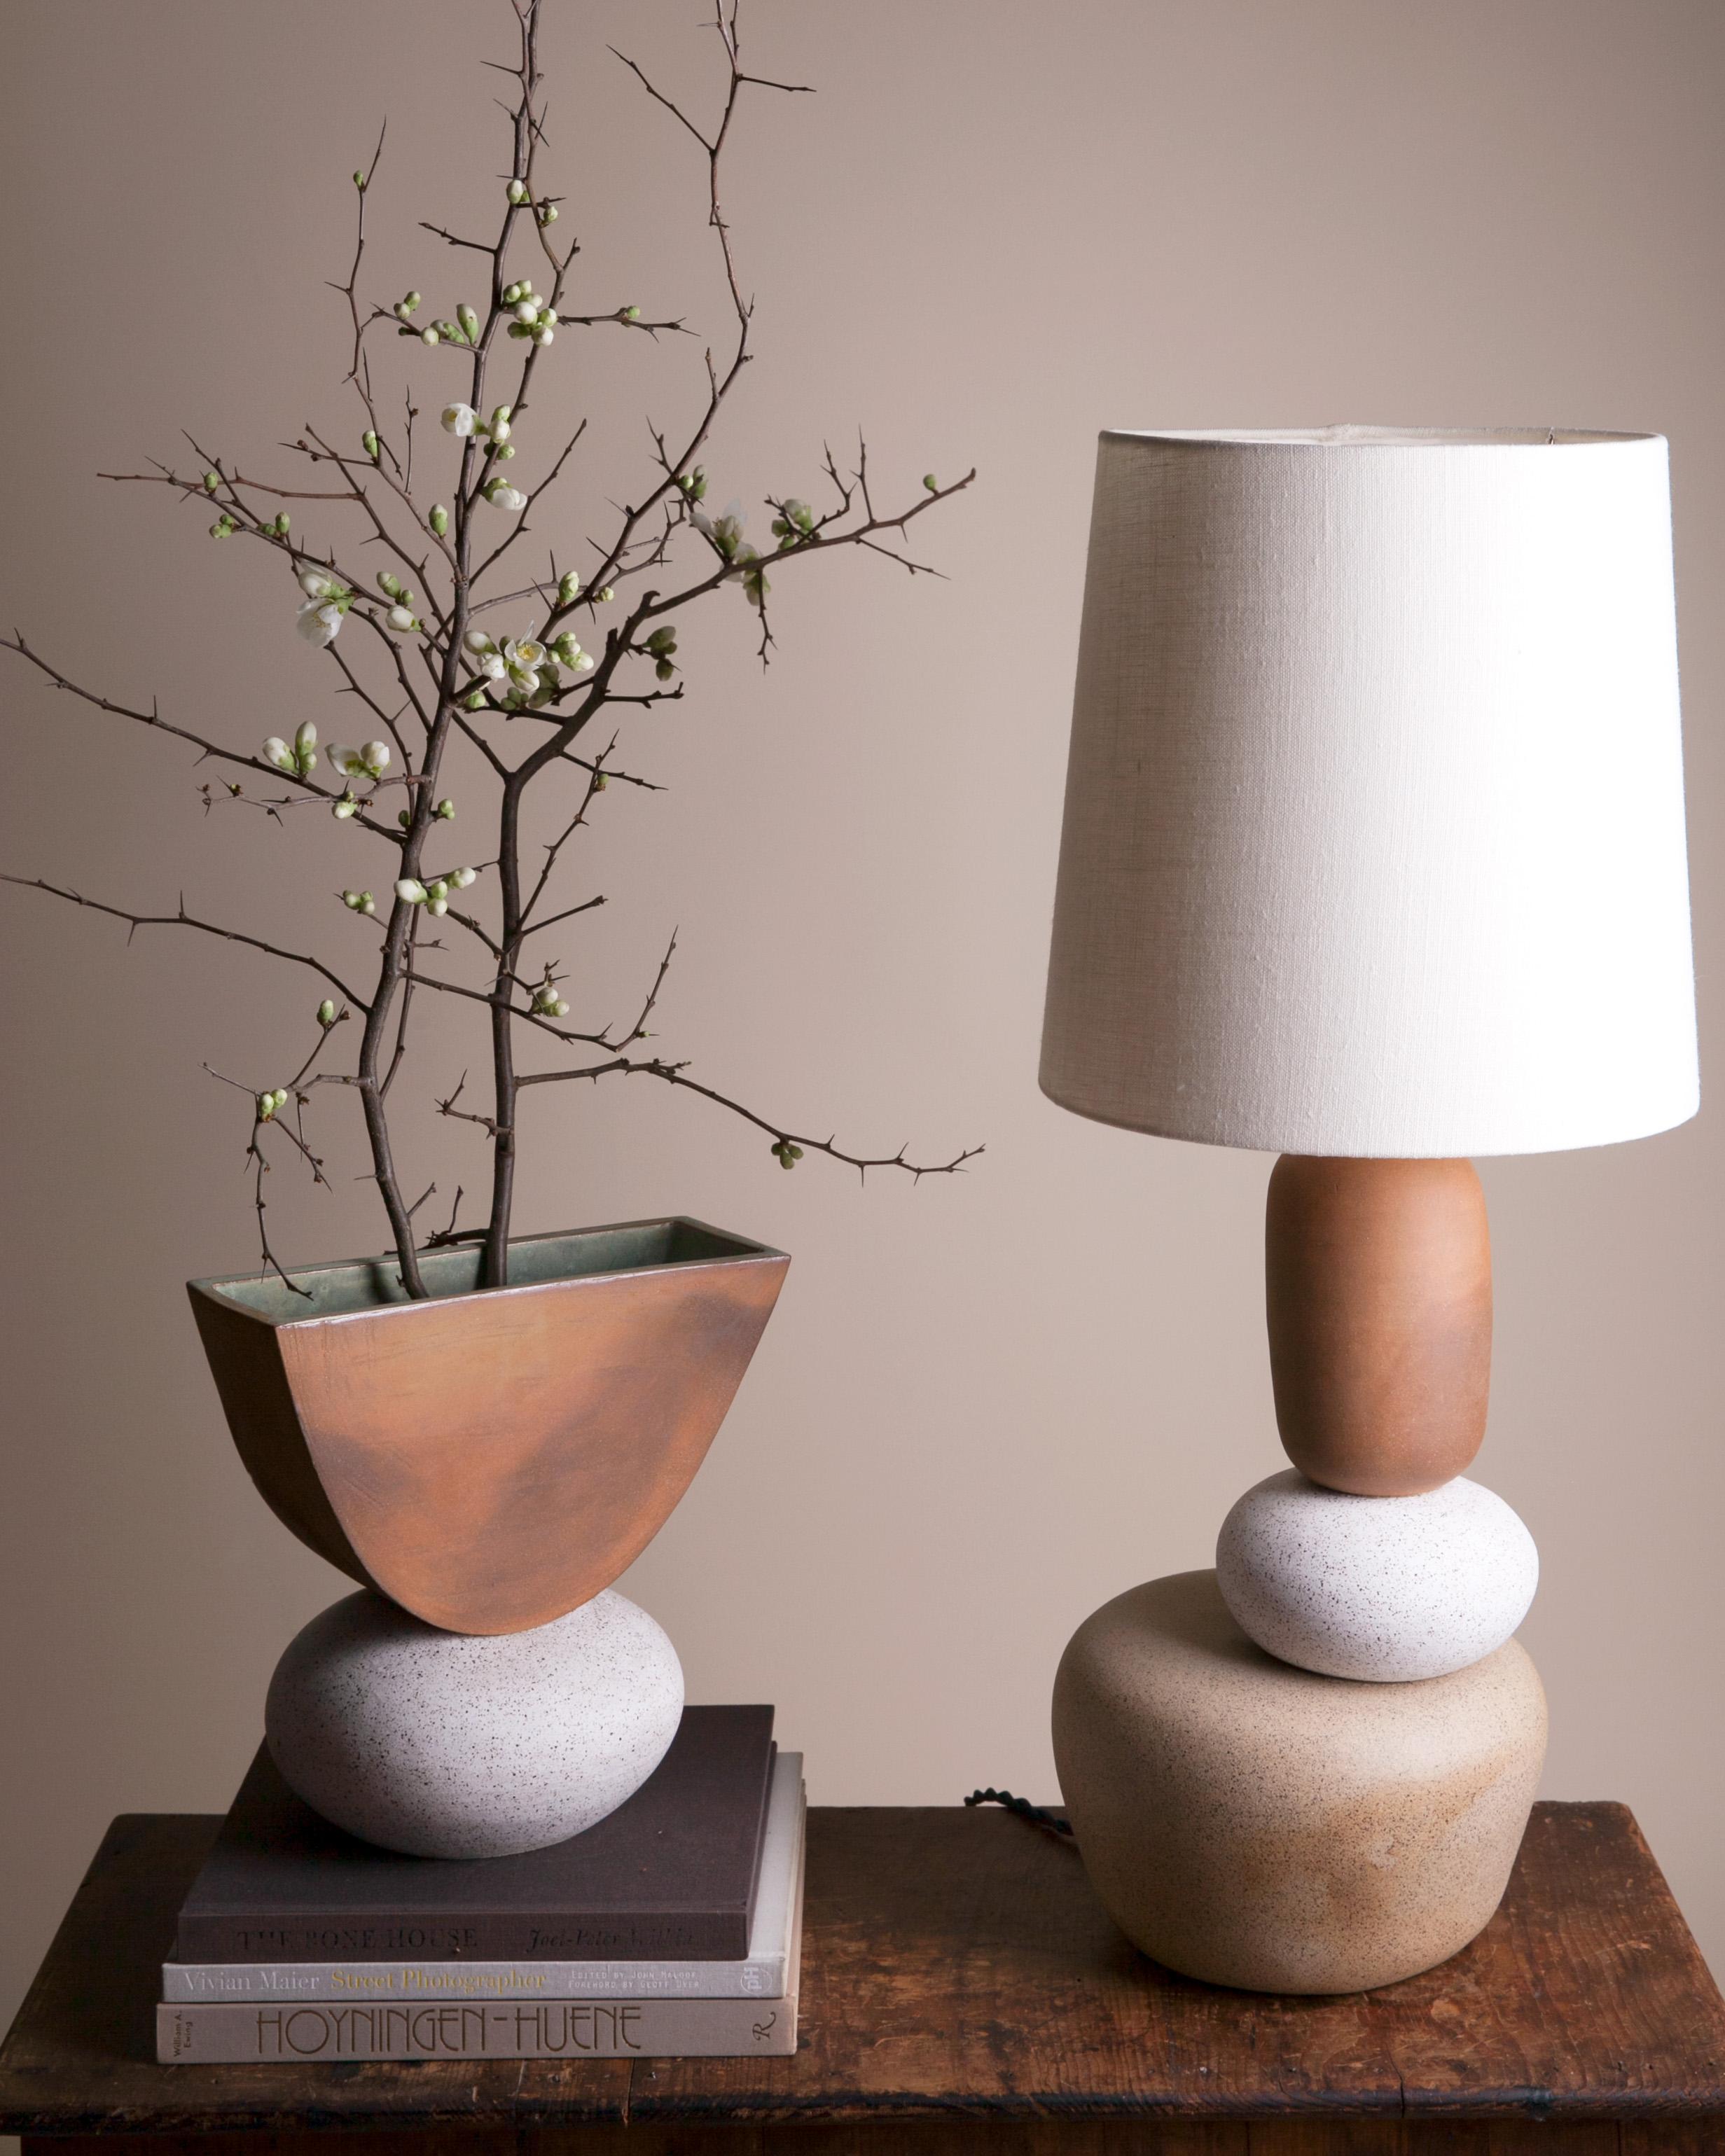 One of a kind ceramic lamp, thrown on the potters wheel and assembled by hand. The lamp base is comprised of two different clay bodies and features a raw, unglazed ceramic surface to highlight the texture of natural clay. This piece was inspired by